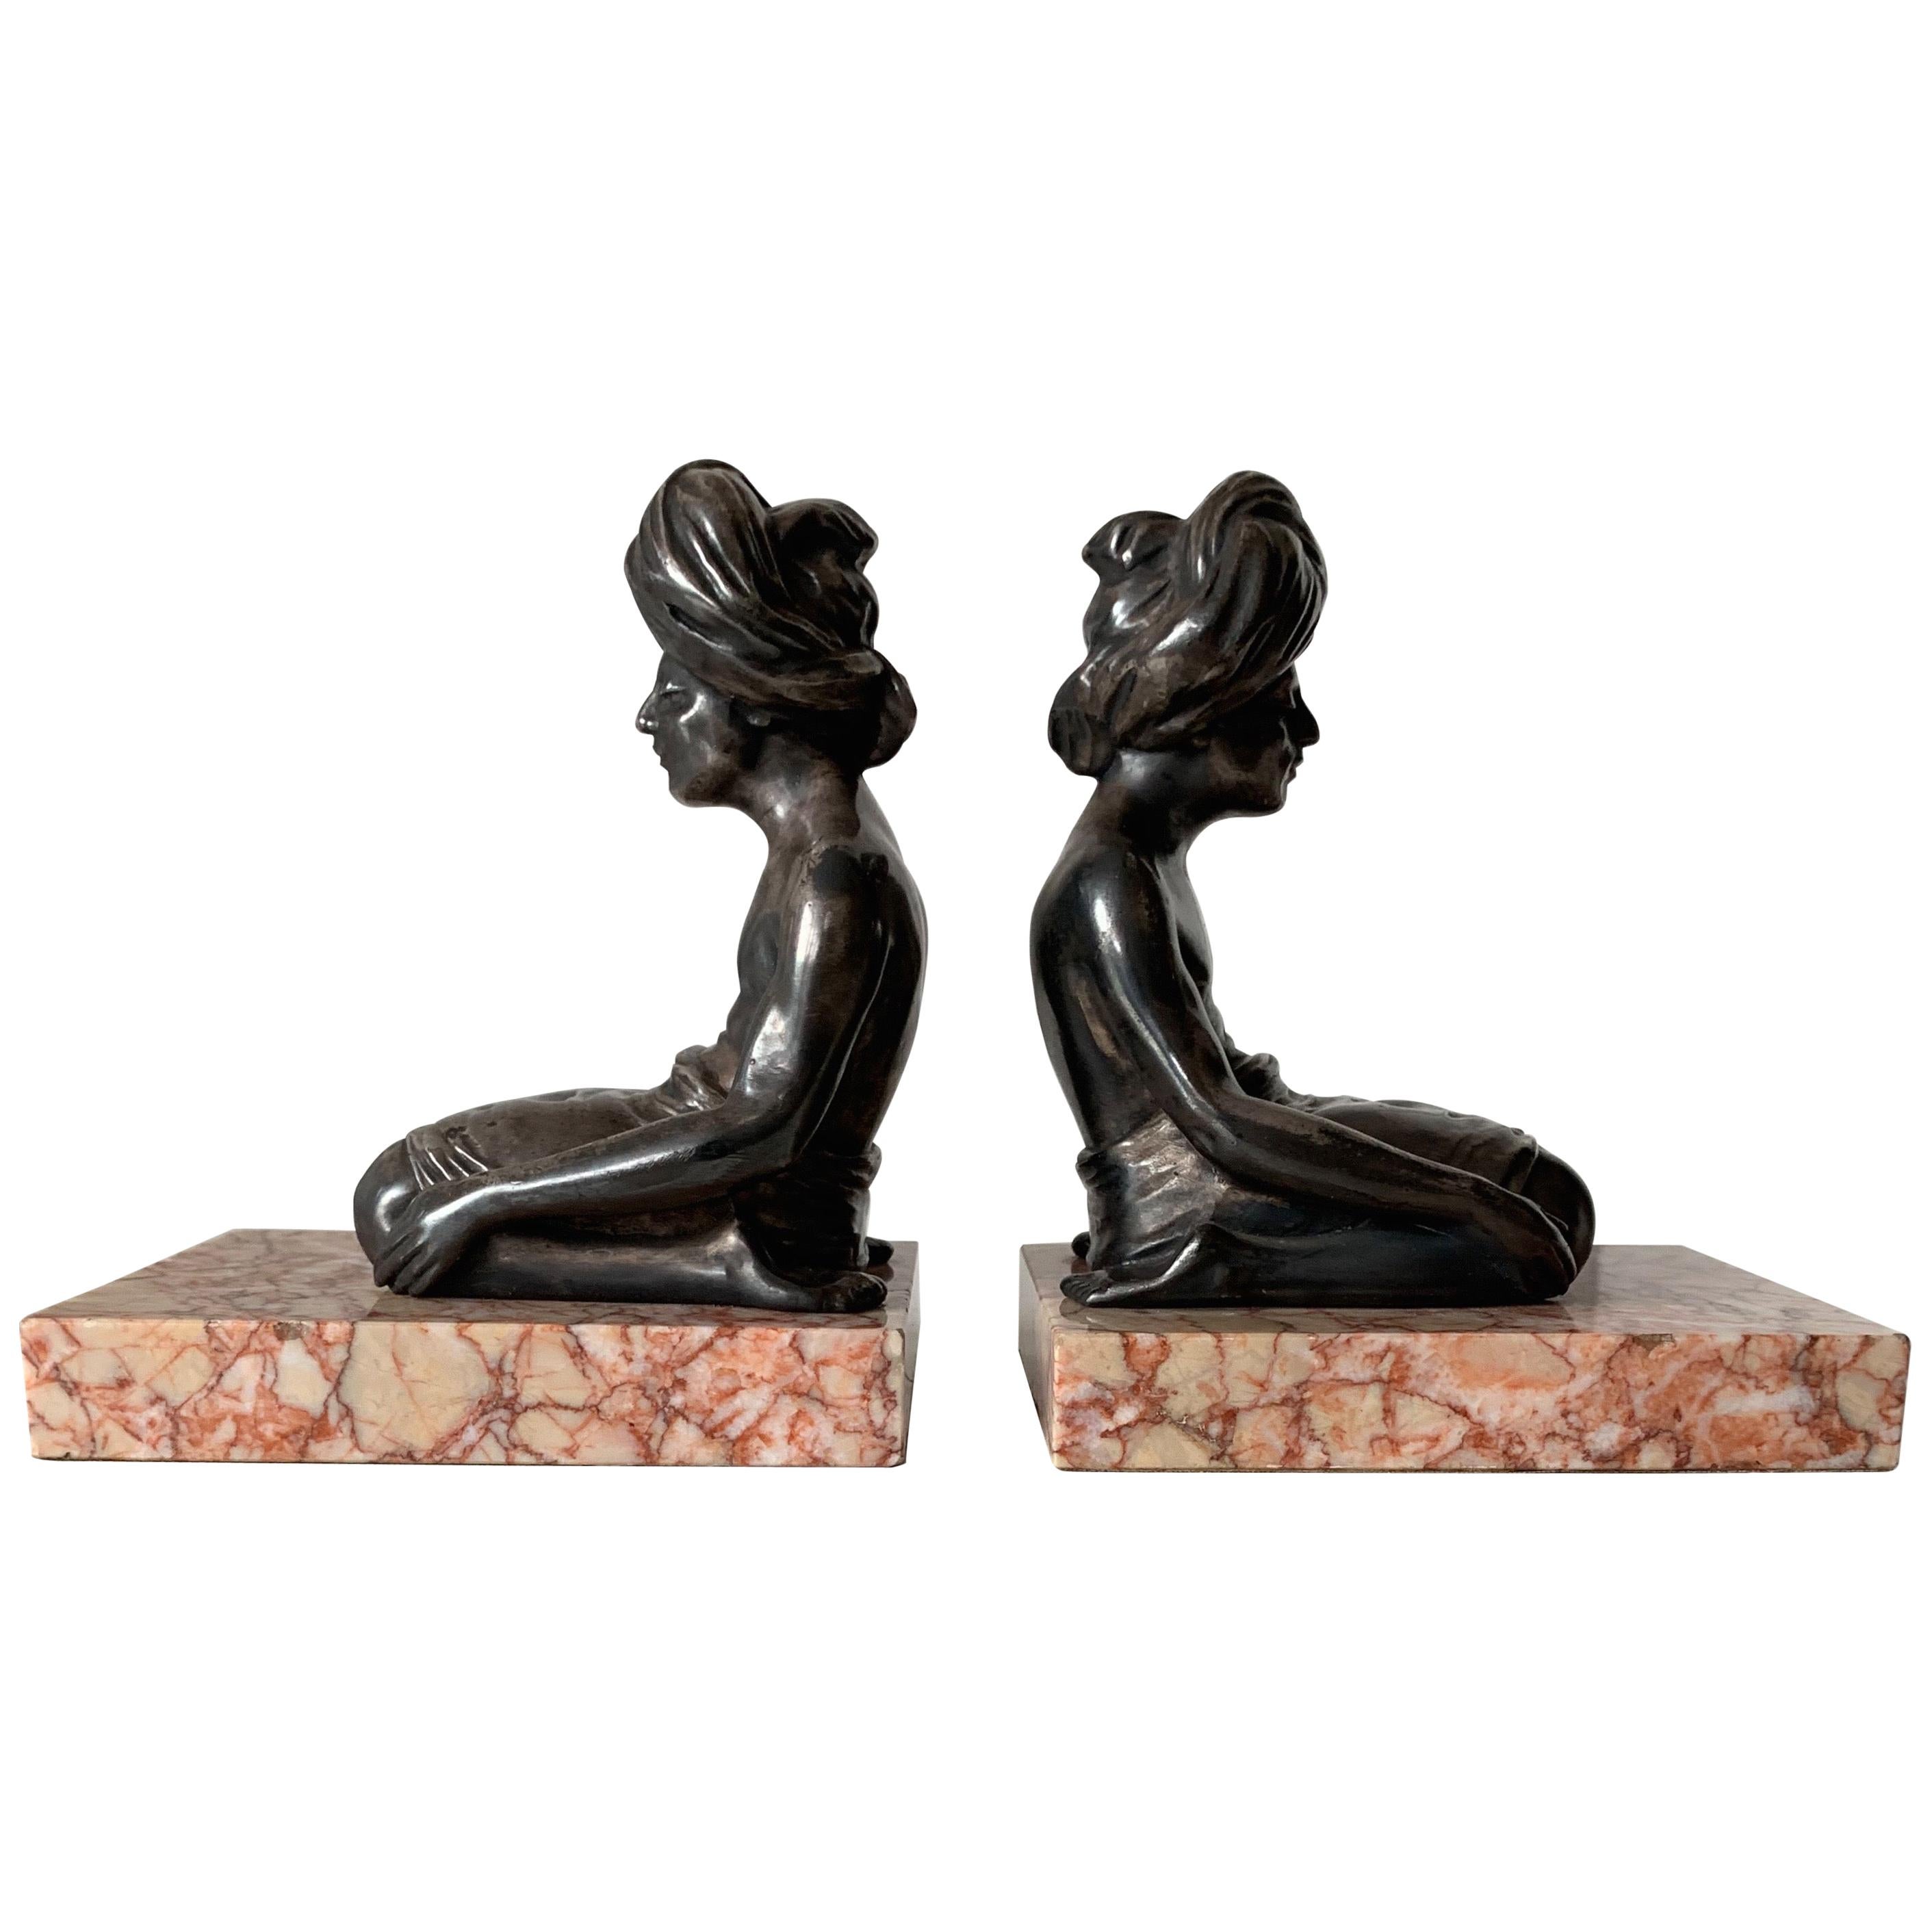 Rare Art Deco Bookends, Indian Sculptures in Meditating Position on Marble Base For Sale